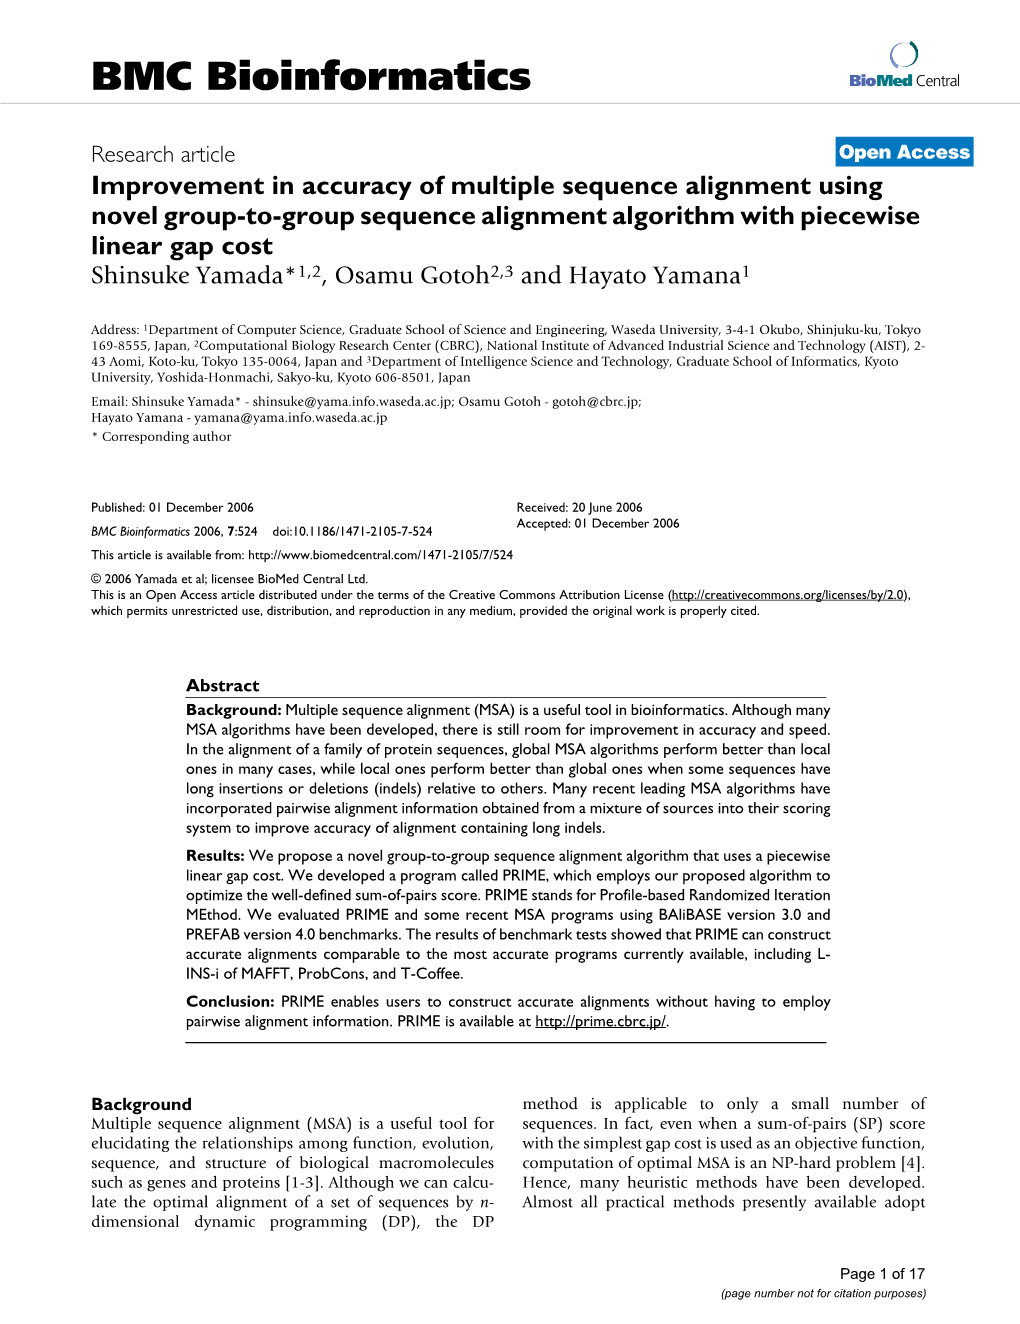 Improvement in Accuracy of Multiple Sequence Alignment Using Novel